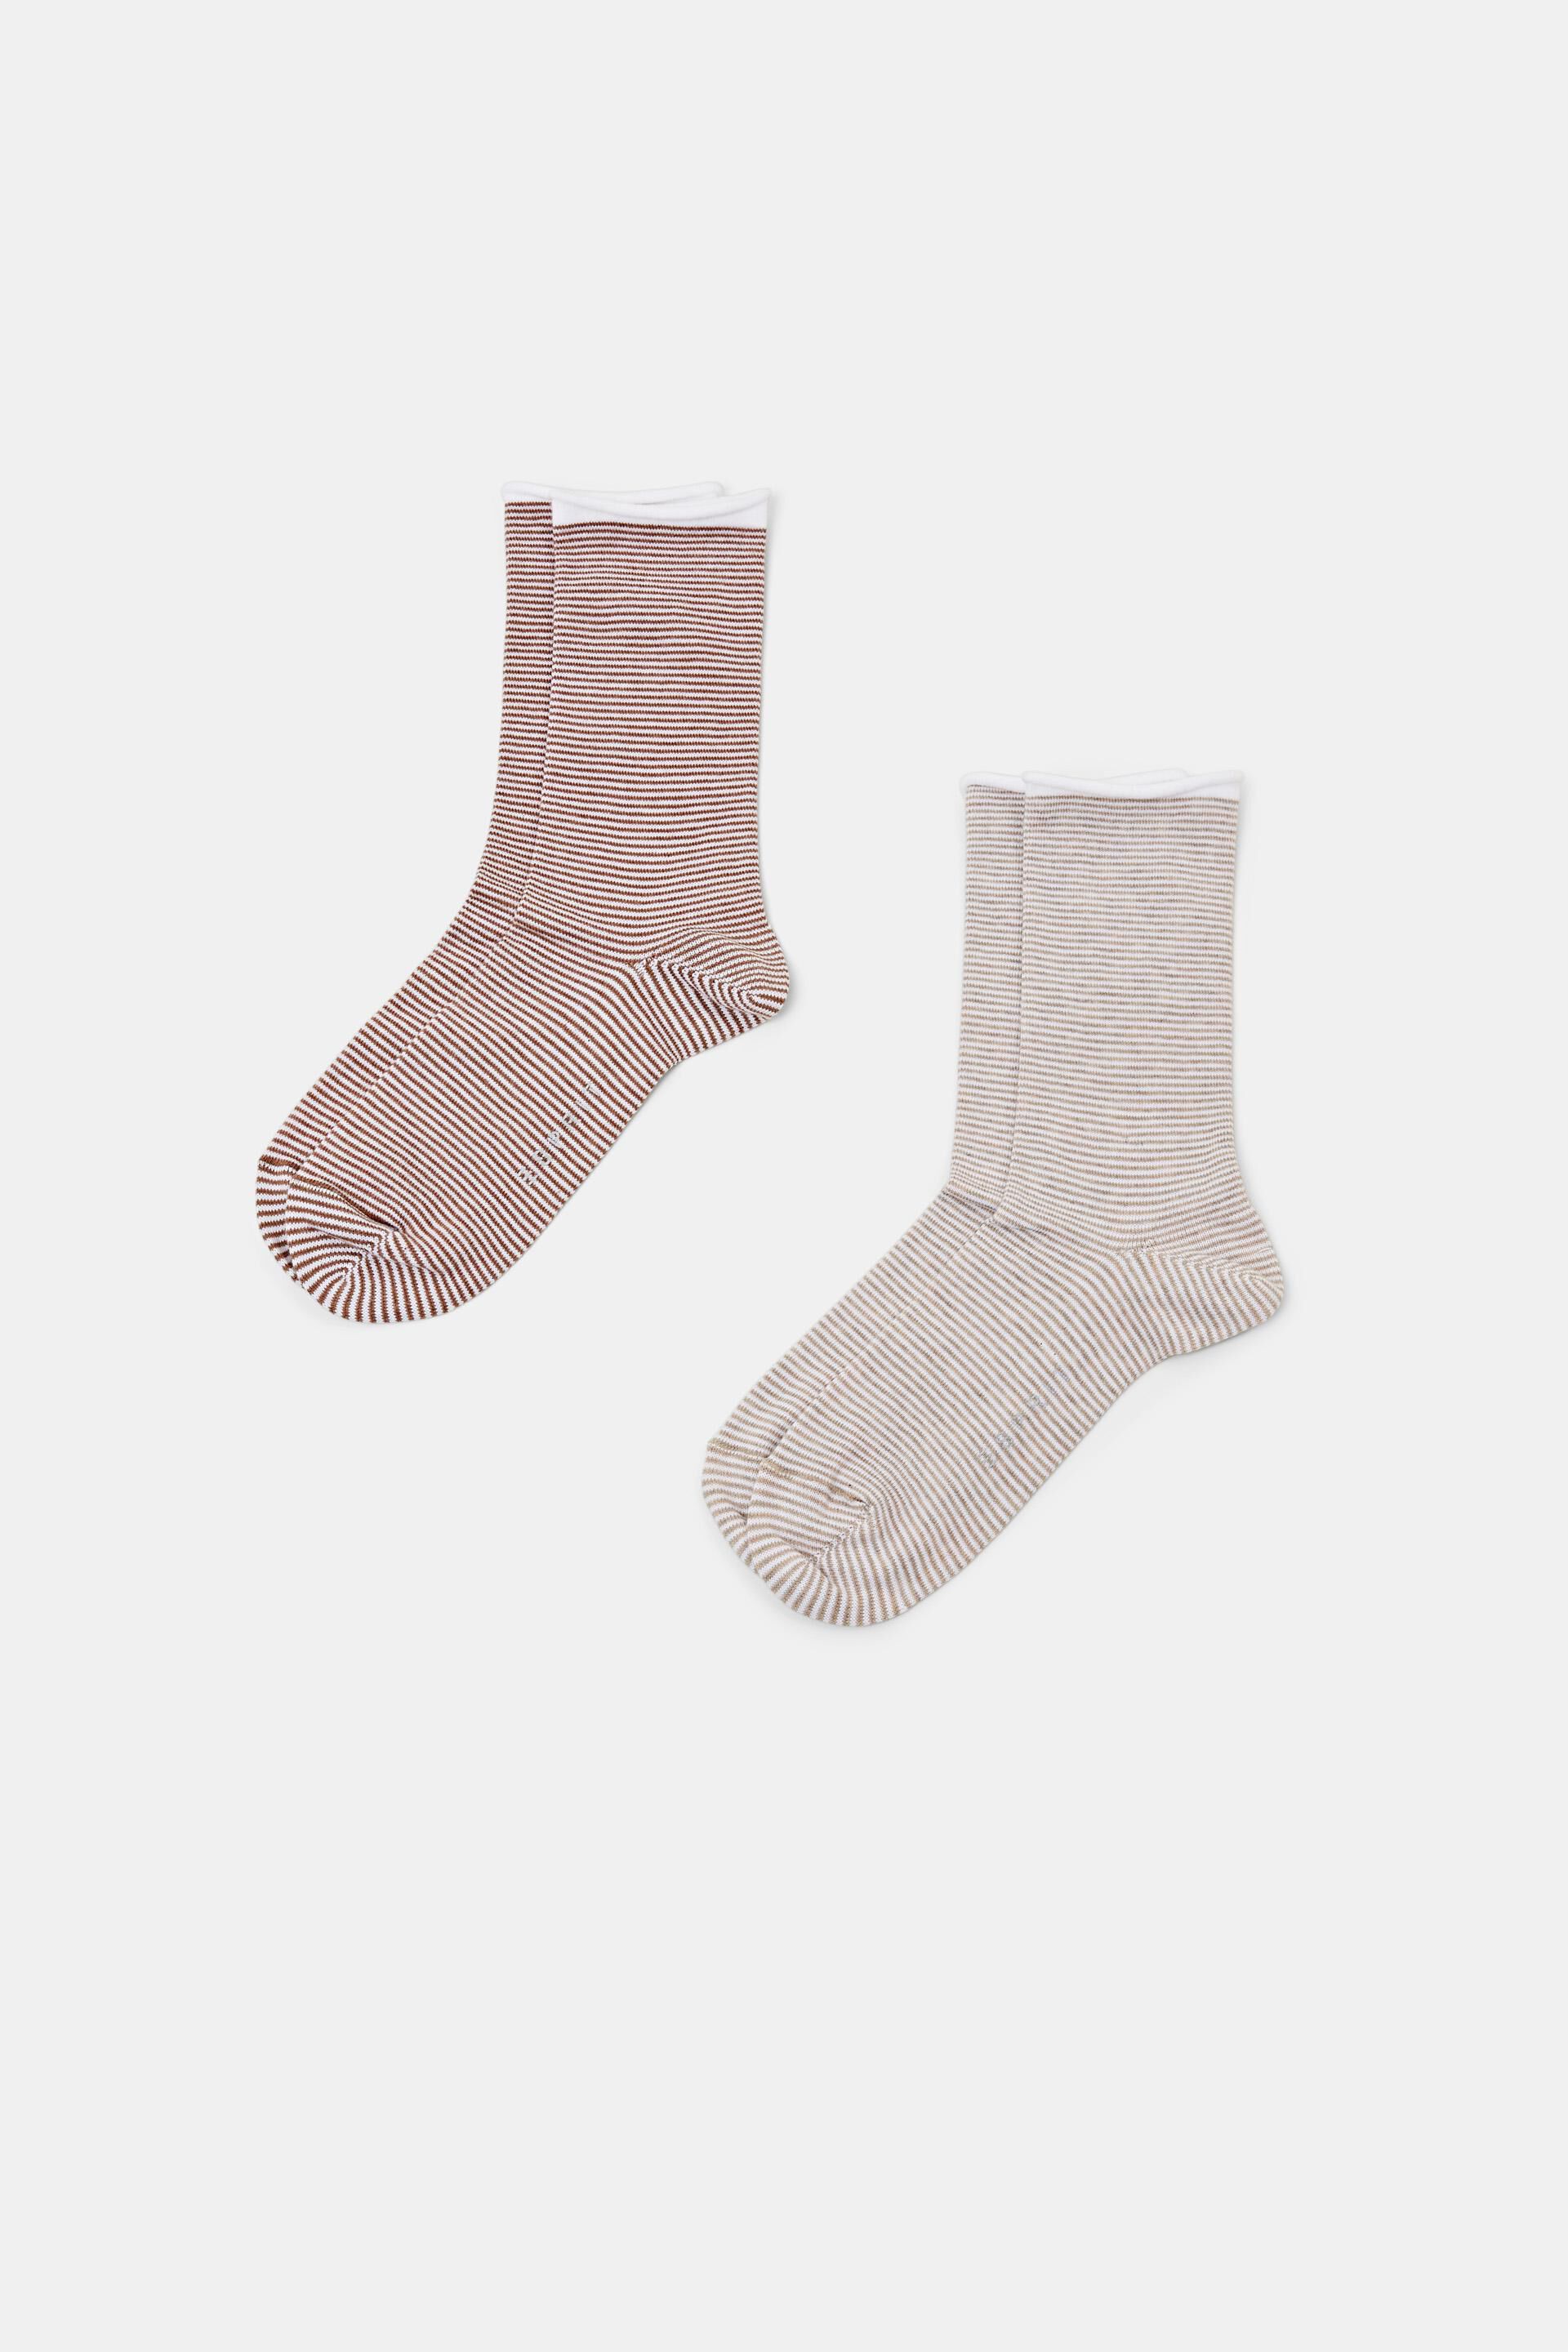 Esprit with Striped cuffs, organic cotton socks rolled